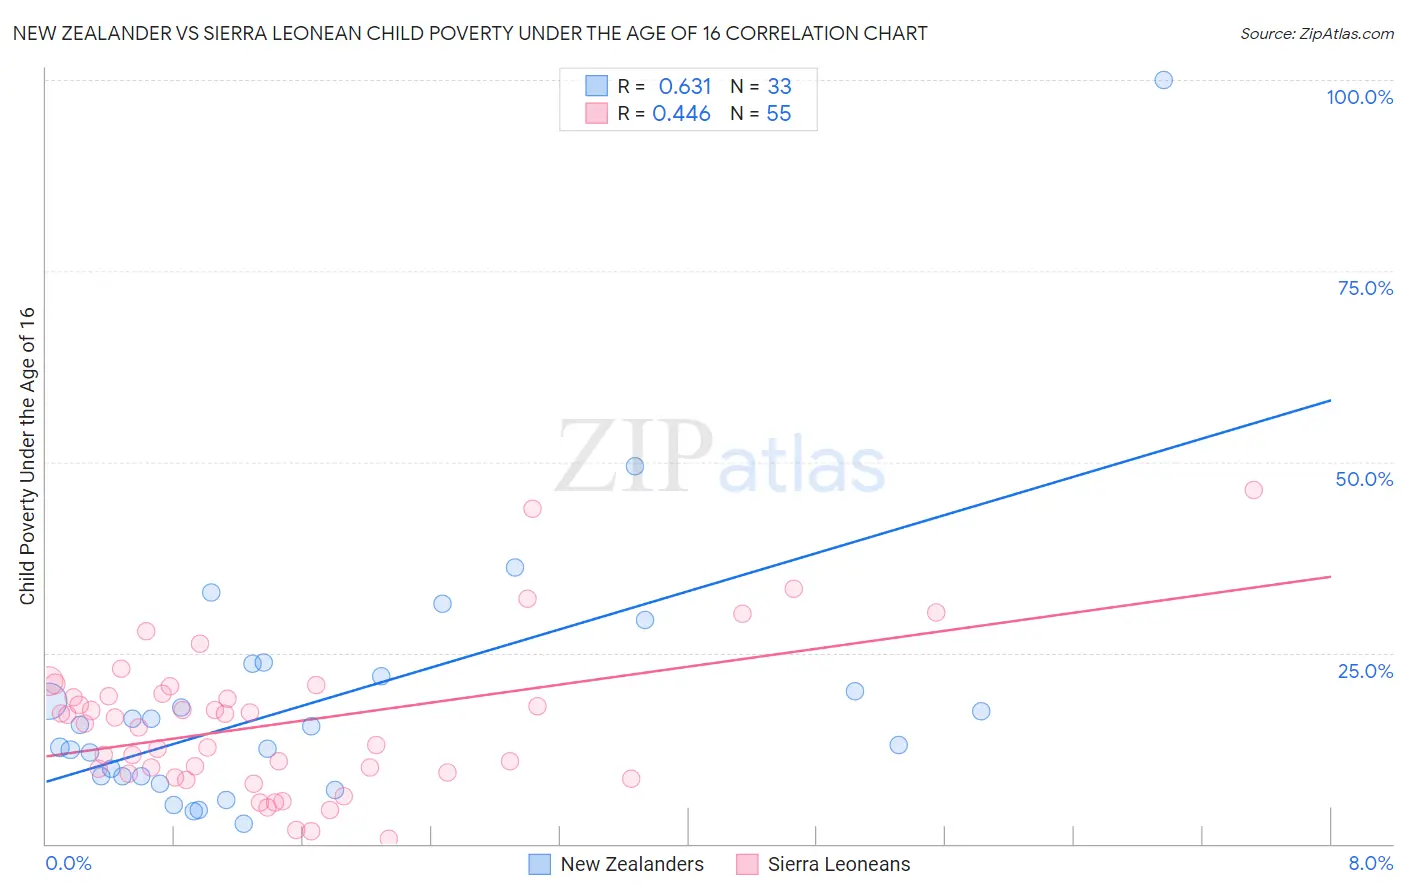 New Zealander vs Sierra Leonean Child Poverty Under the Age of 16